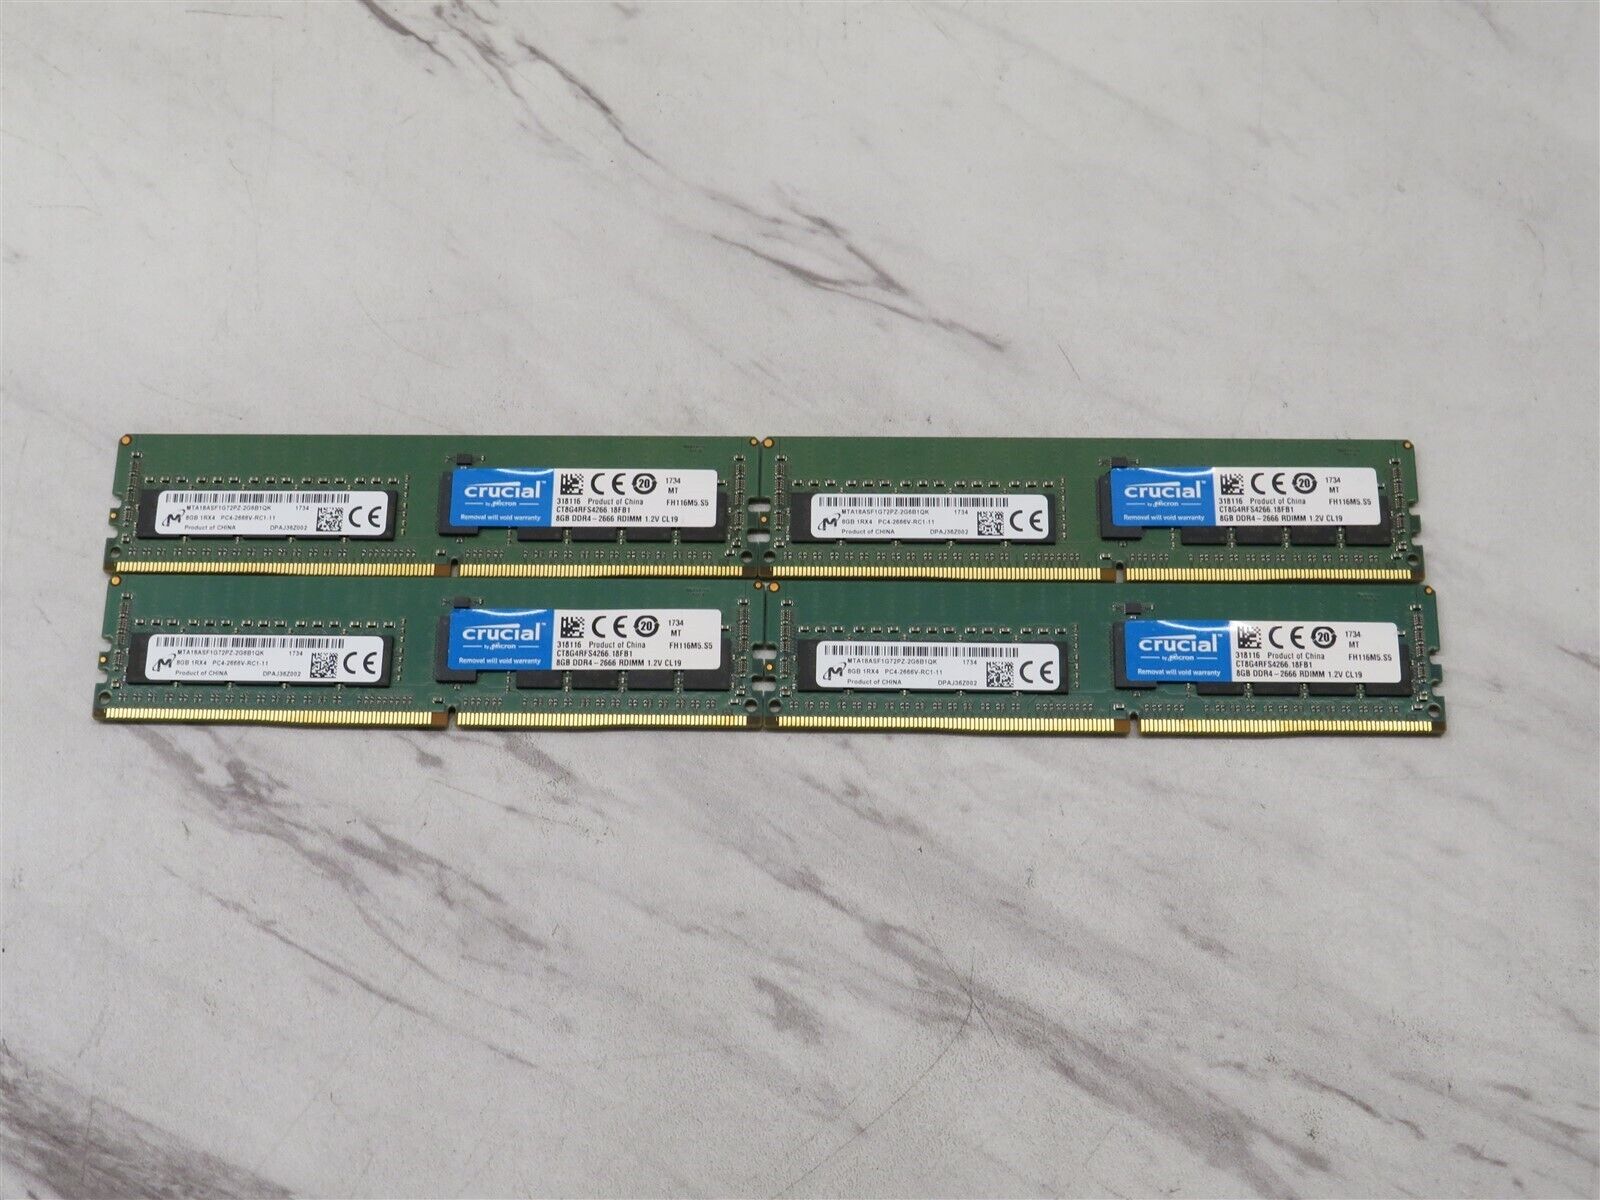 LOT OF 4 CRUCIAL MICRON 8GB 1RX4 PC4-2666V-RC1-11 DIMM DDR4-2666 MEMORY 